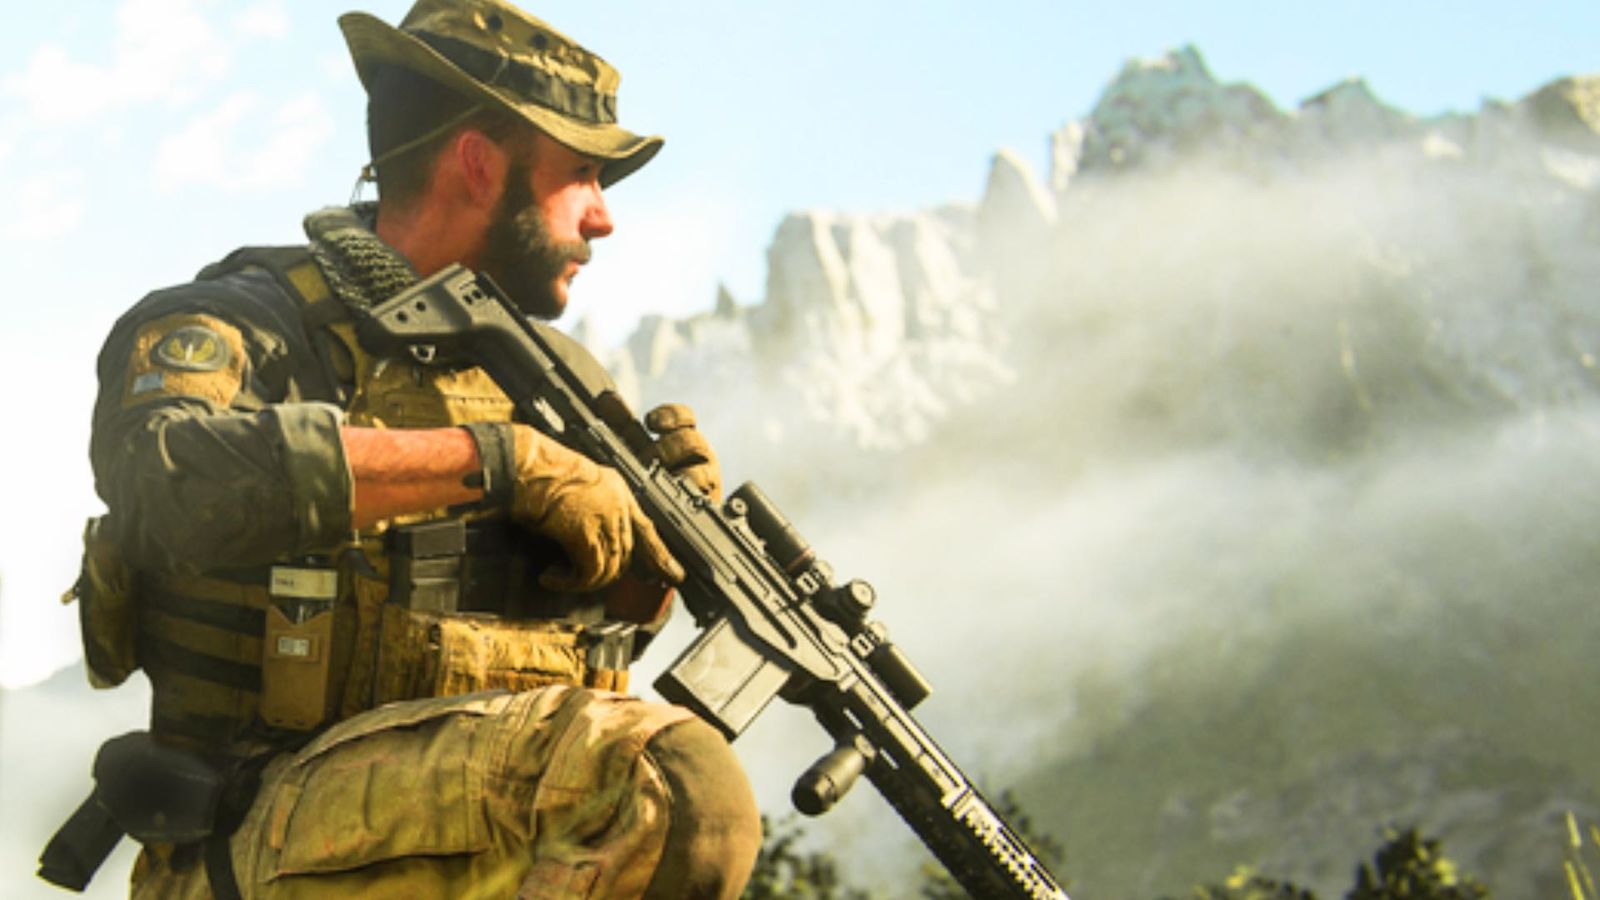 Modern Warfare 3 captain price looking all mysterious holding a sniper rifle at arms 